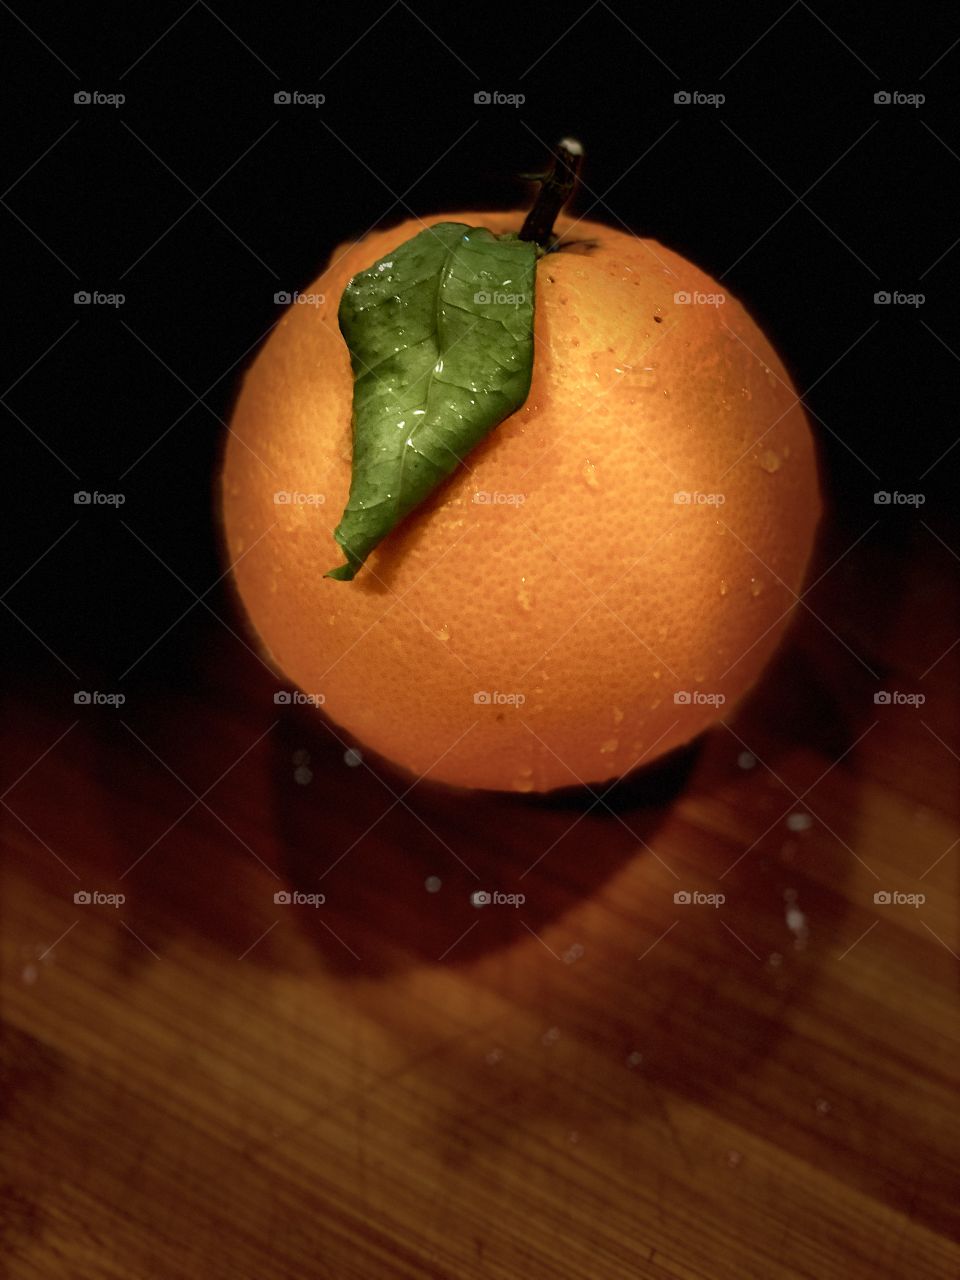 The Simply Amazing Orange! A Perfect Fruit. 5 Star Photos!